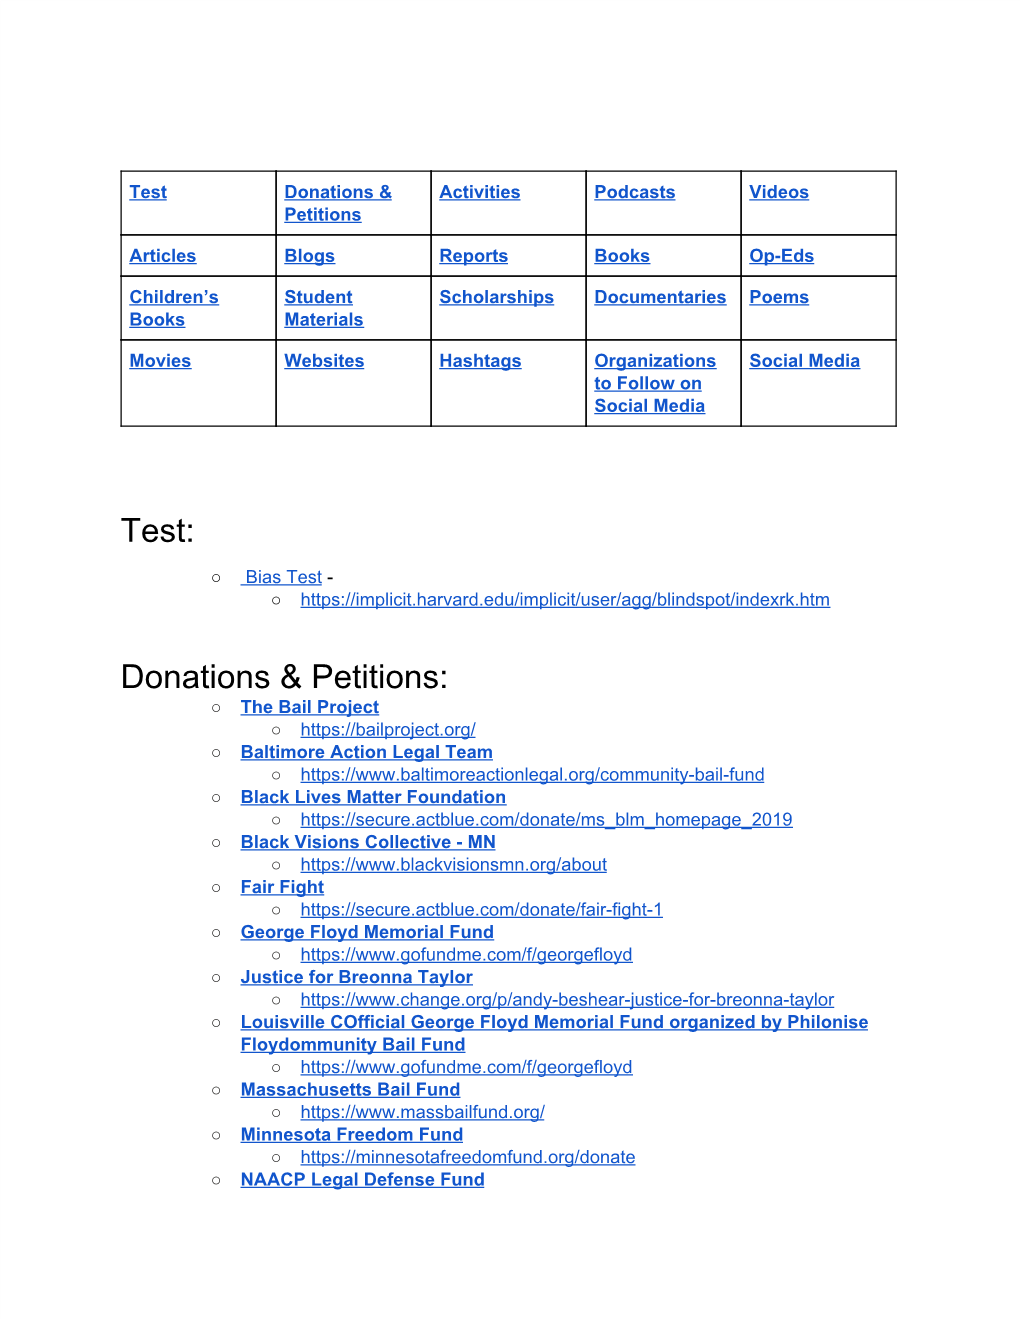 Donations & Petitions